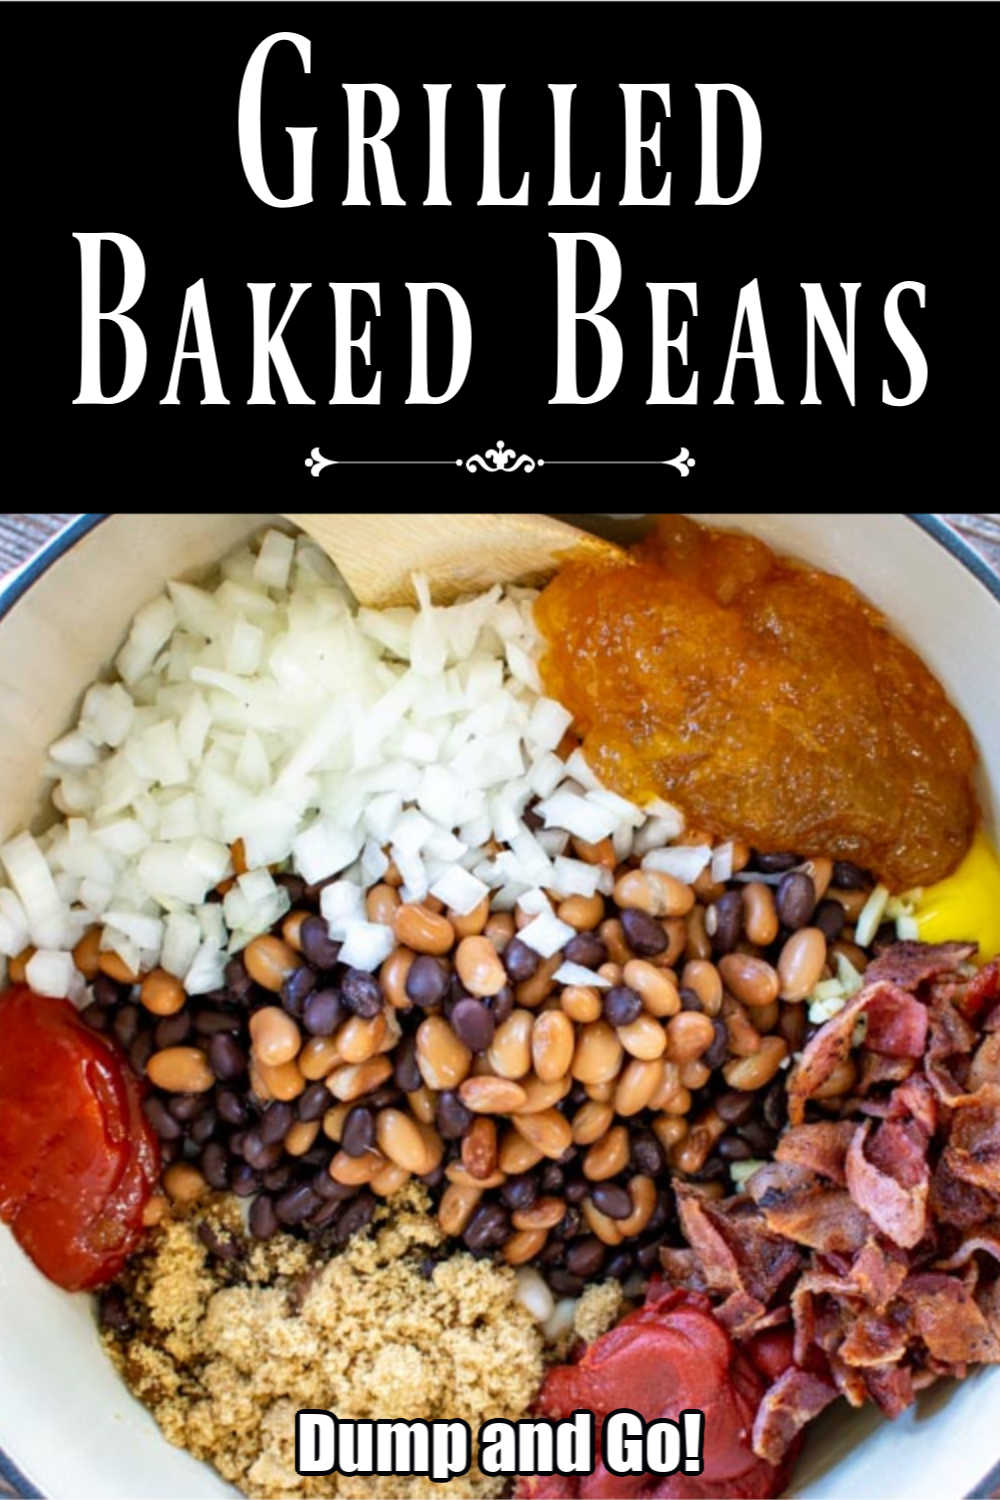 Grilled Bourbon Peach Baked Beans